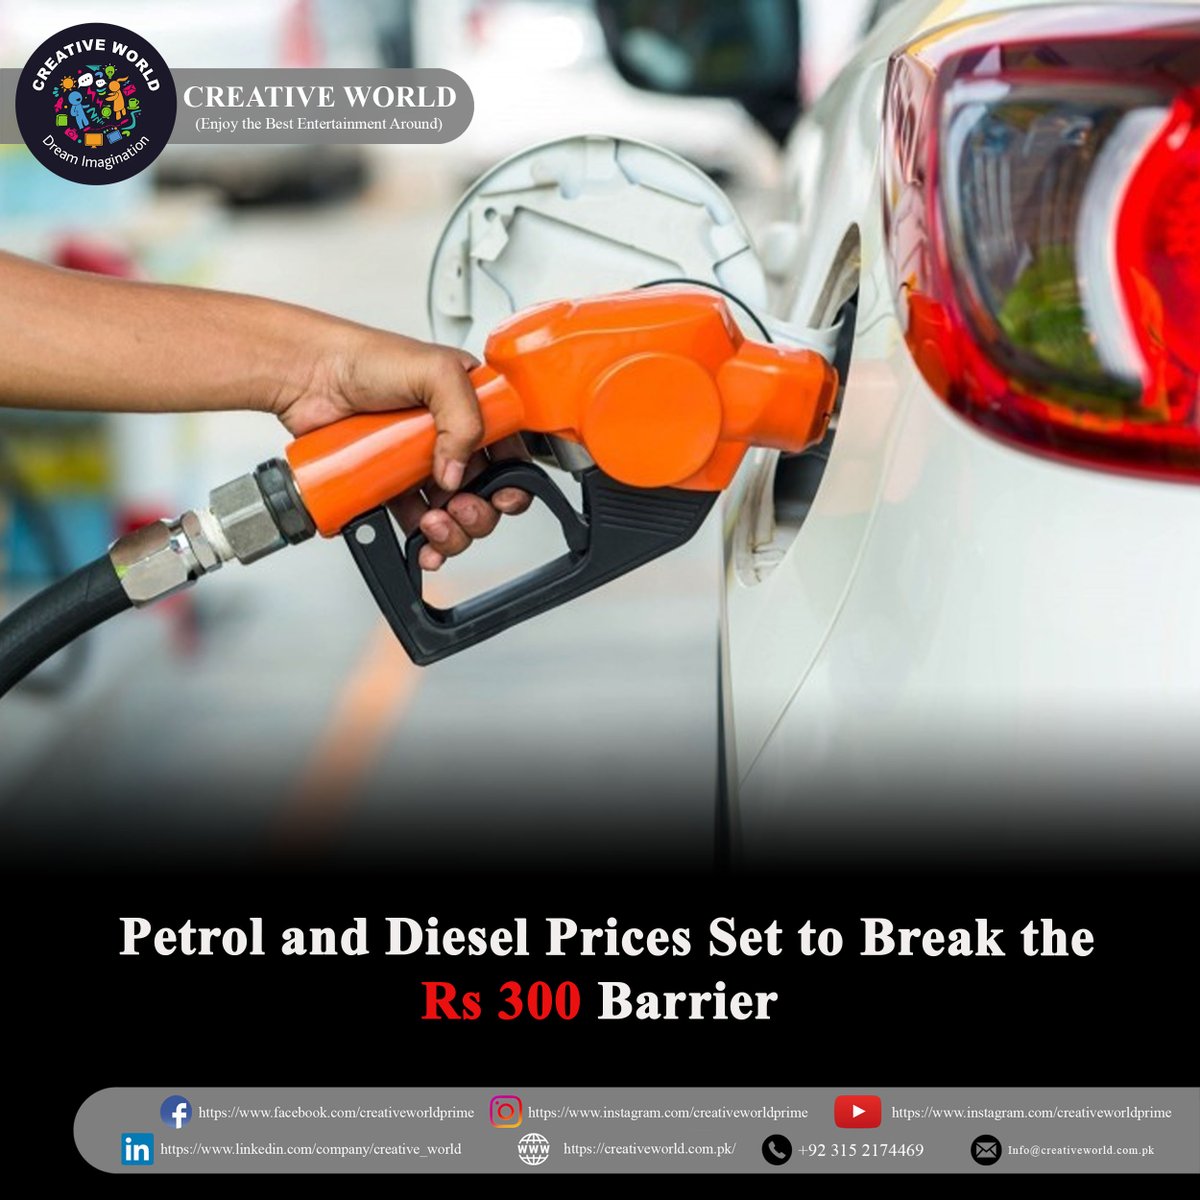 Rising global oil prices and a weaker rupee might lead to higher petroleum prices in Pakistan. 

#viralpost #trendingpost #news #NewsUpdate #postoftheday #OilPriceHike #InflationConcerns #ImranKhan #PetrolDieselPrice #snapchat